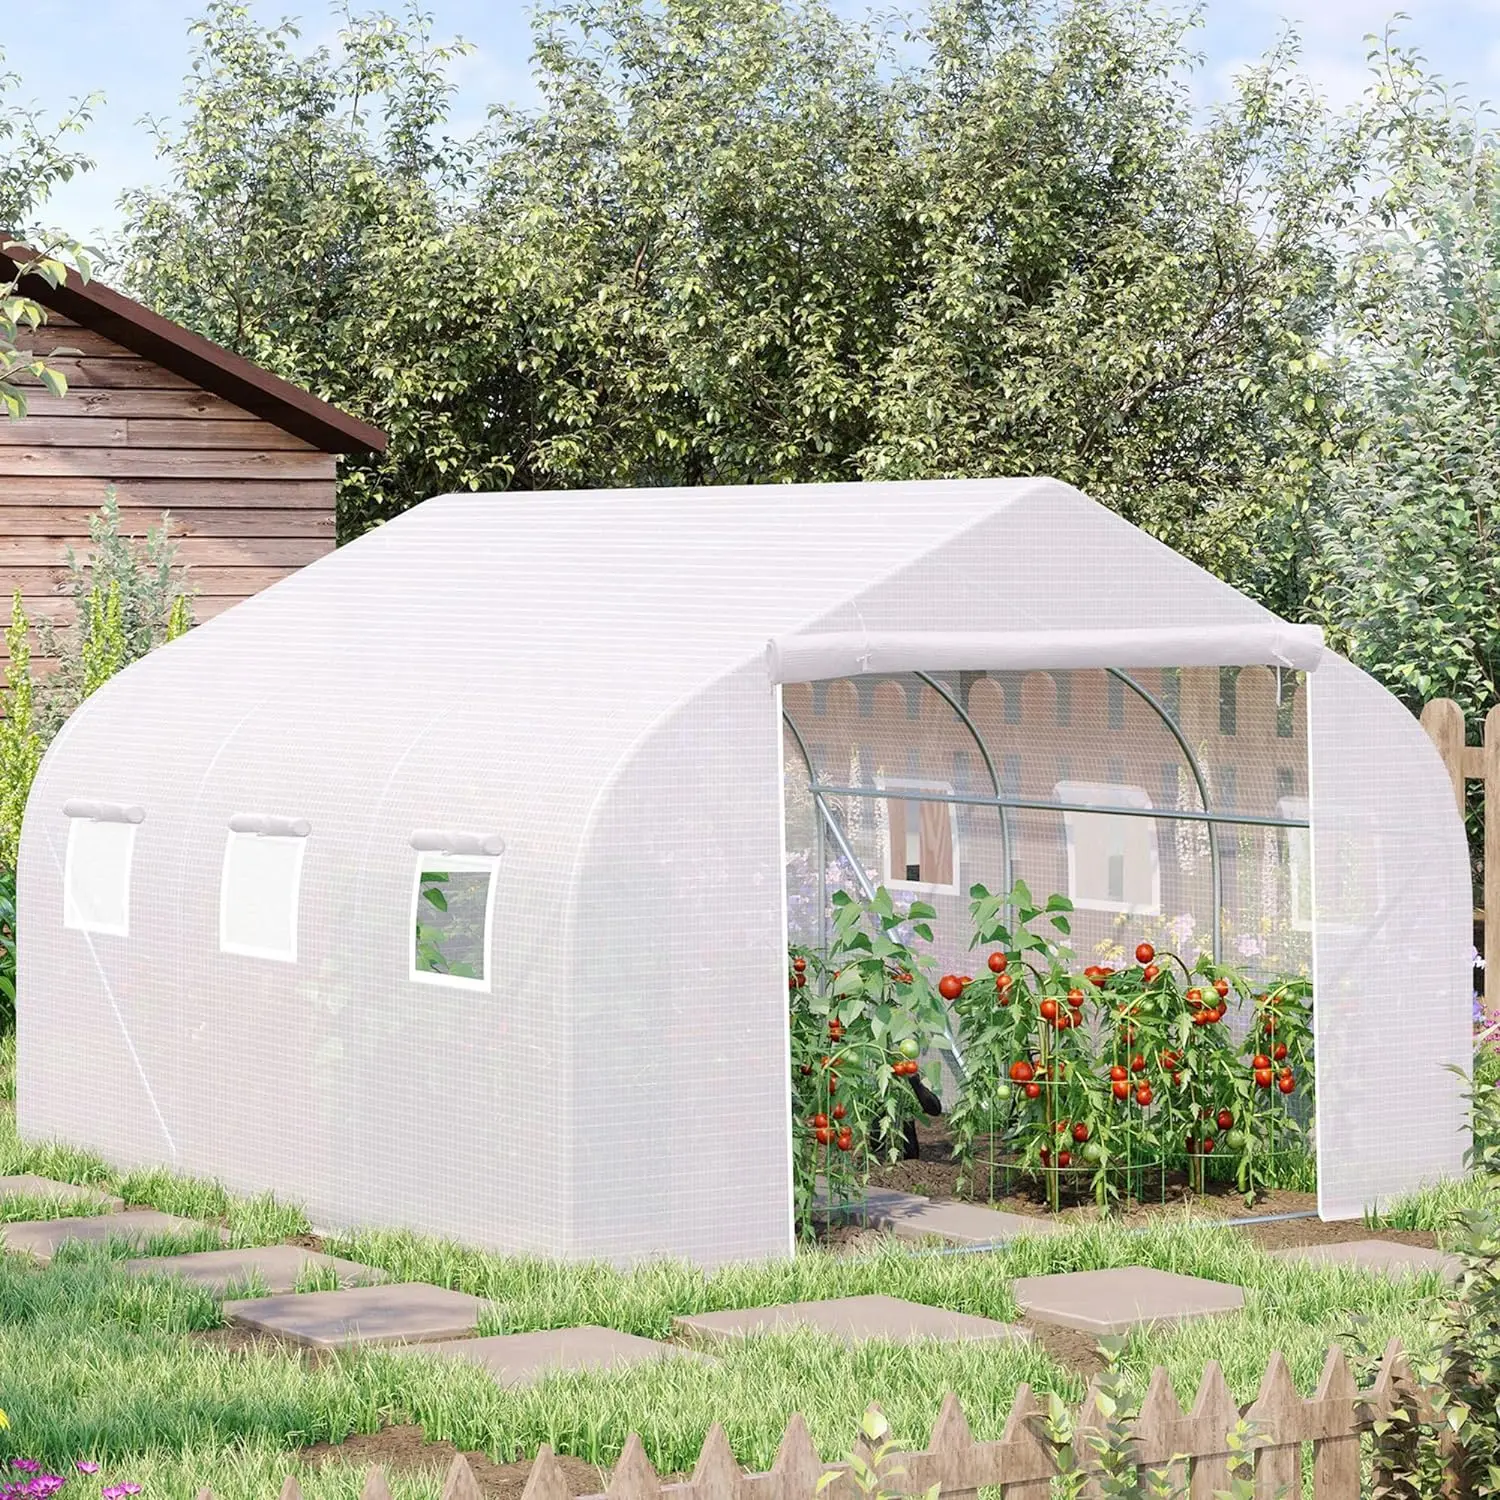 

11.5' x 10' x 6.5' Outdoor Walk-in Greenhouse, Tunnel Green House with Roll-up Windows, Zippered Door, PE Cover, Heavy Duty